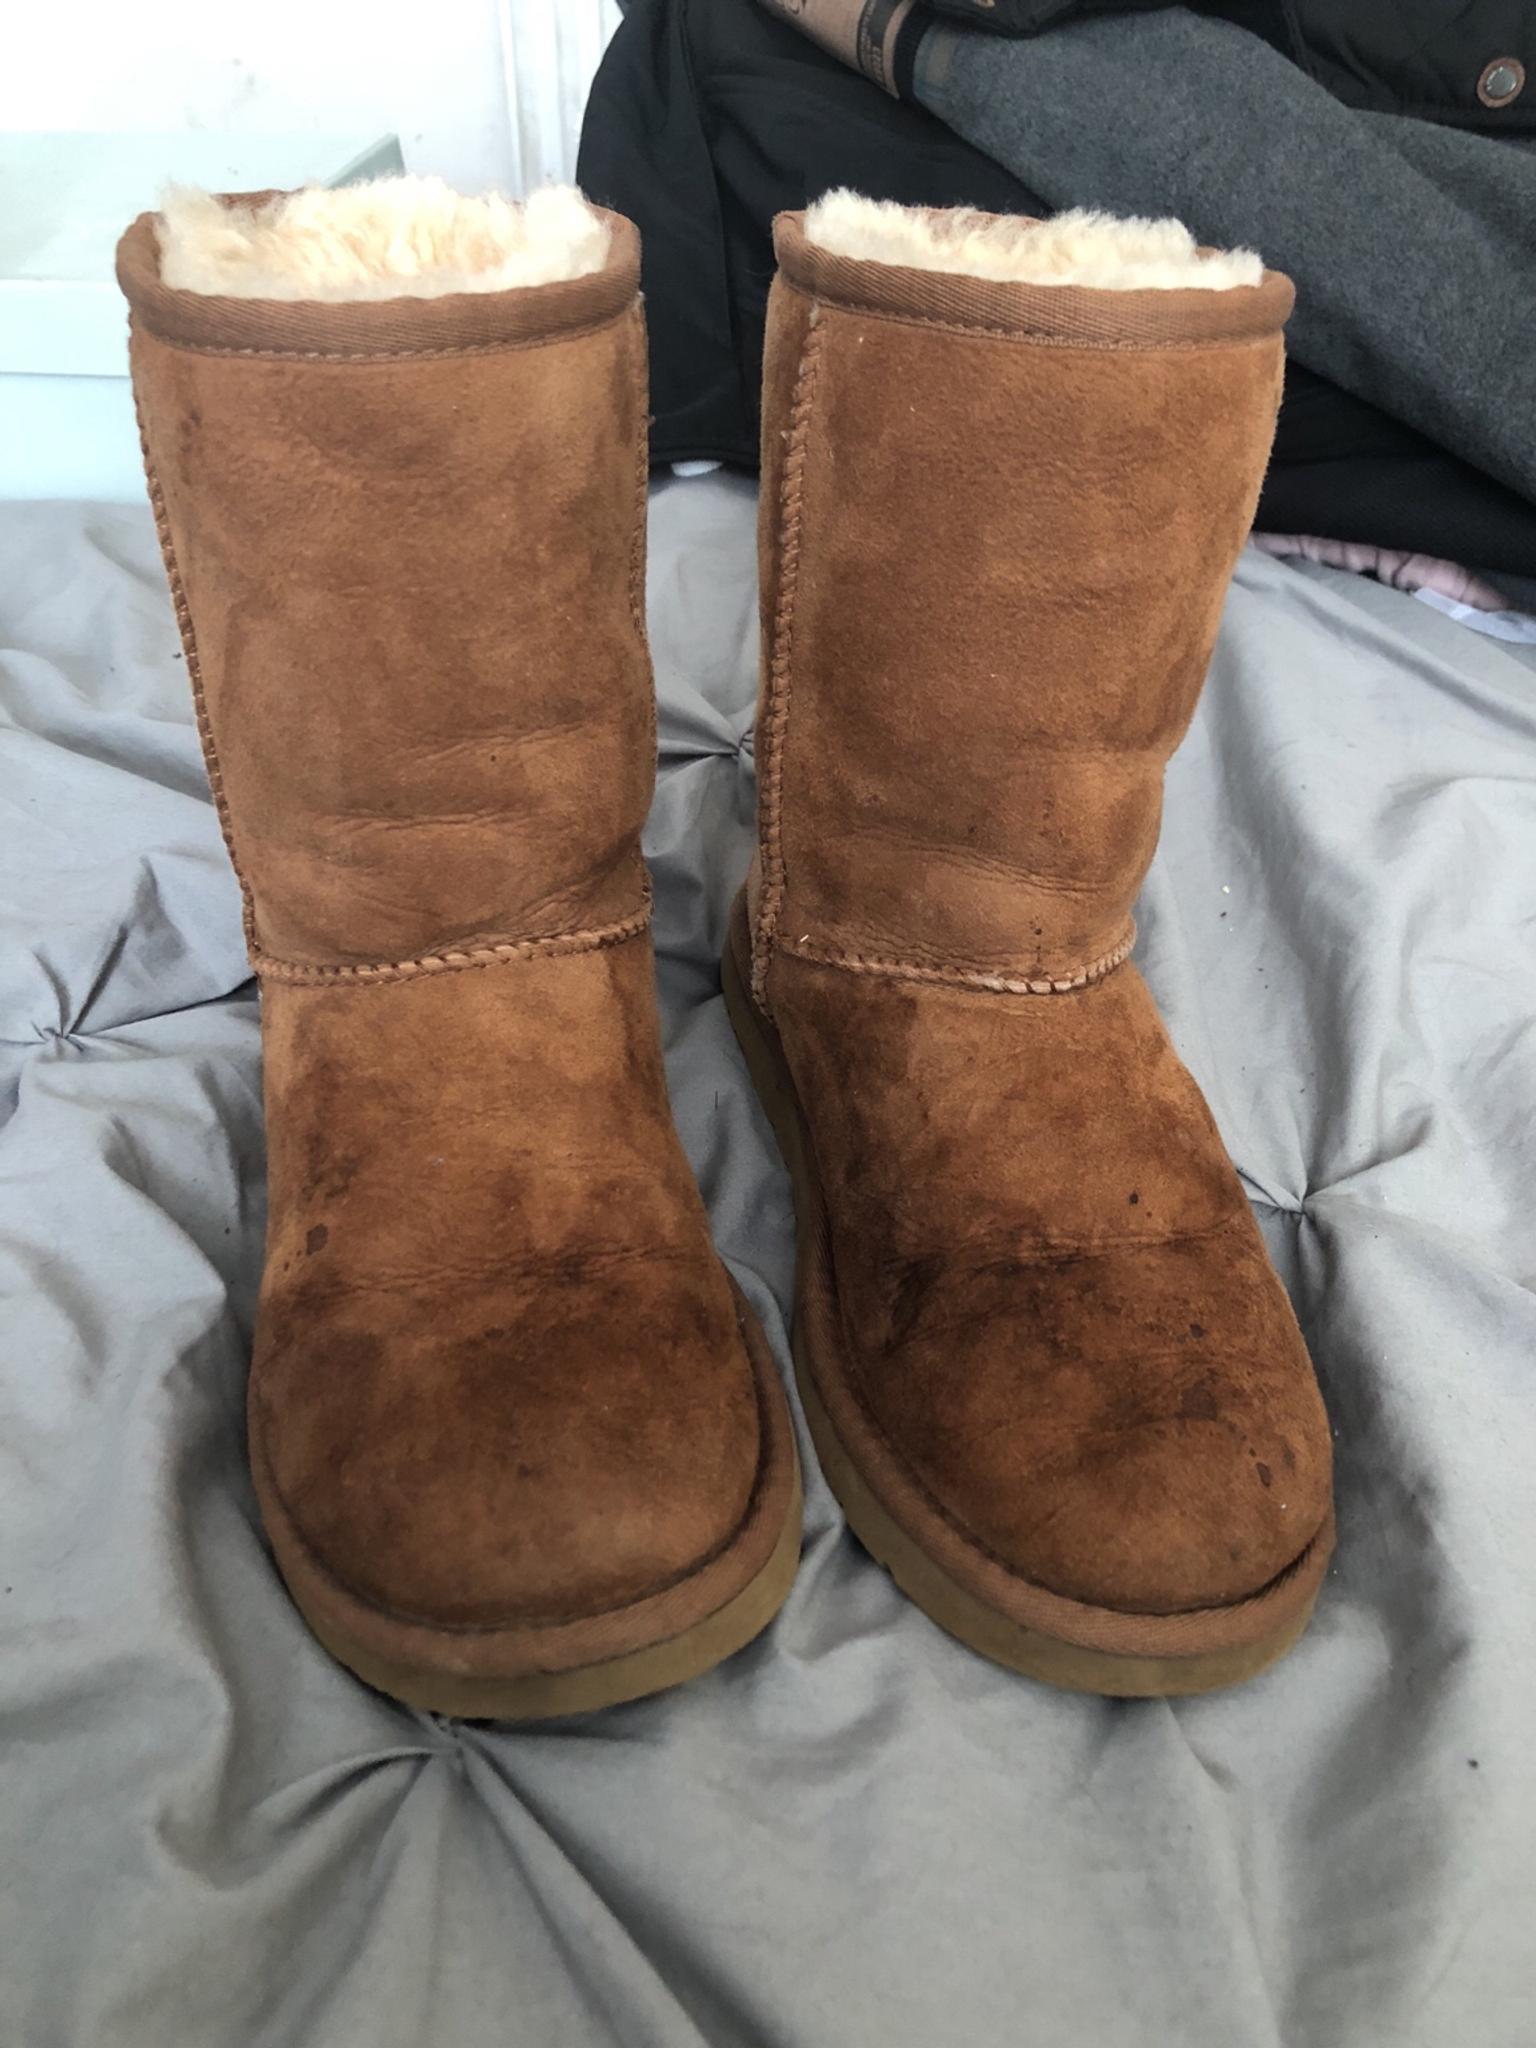 uggs size 3